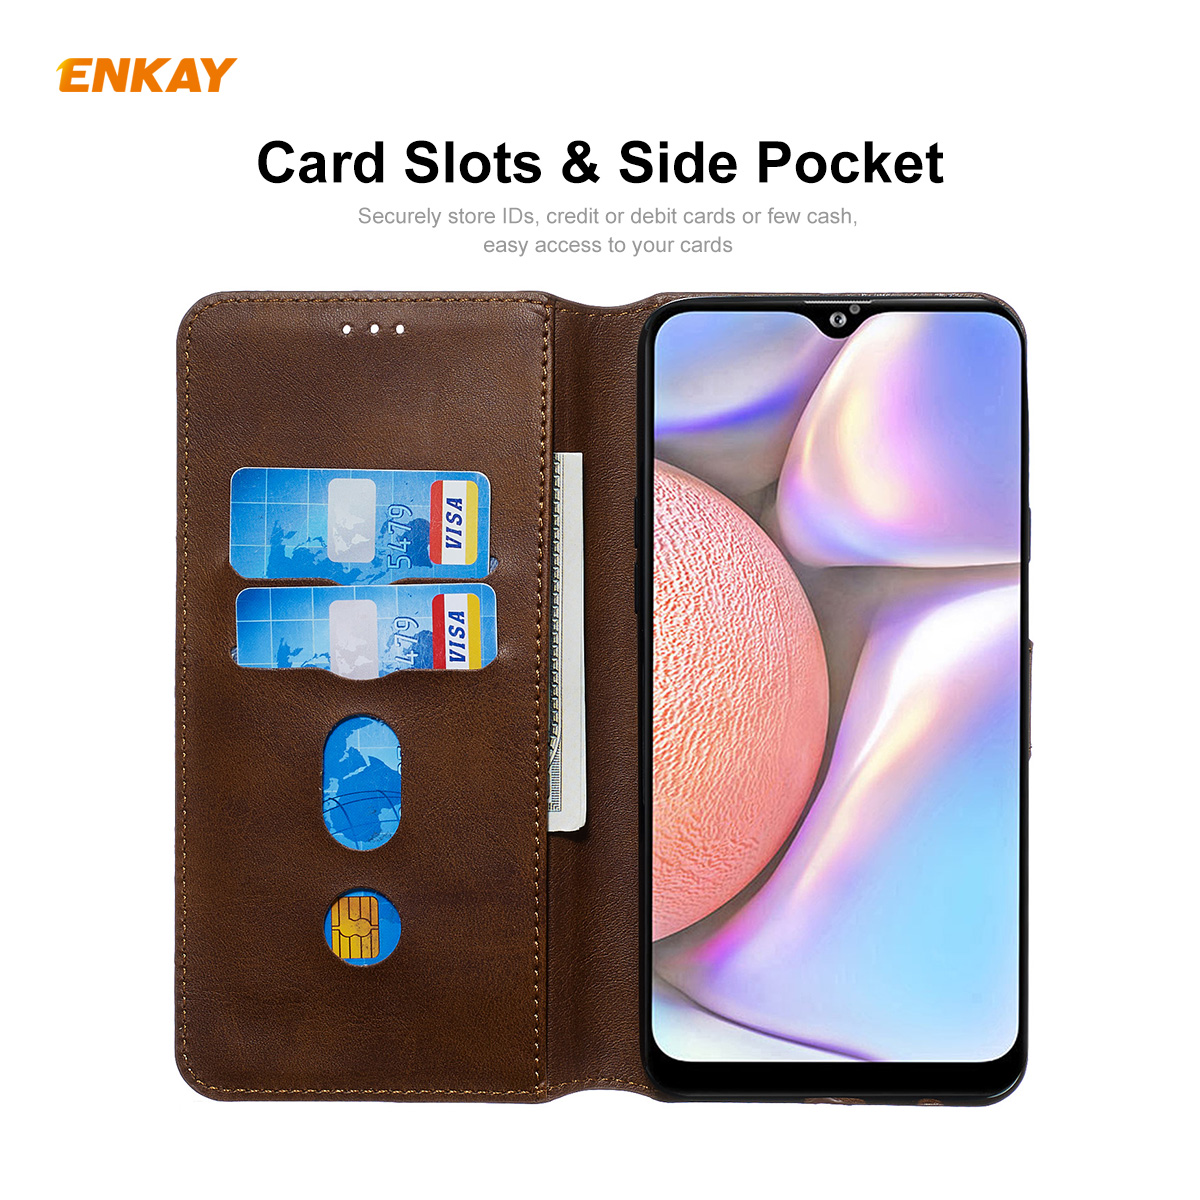 ENKAY-ENK-PUC026-for-Samsung-Galaxy-A10S--M01S-Case-Magnetic-Flip-with-Multi-Card-Slot-Stand-PU-Leat-1789369-5